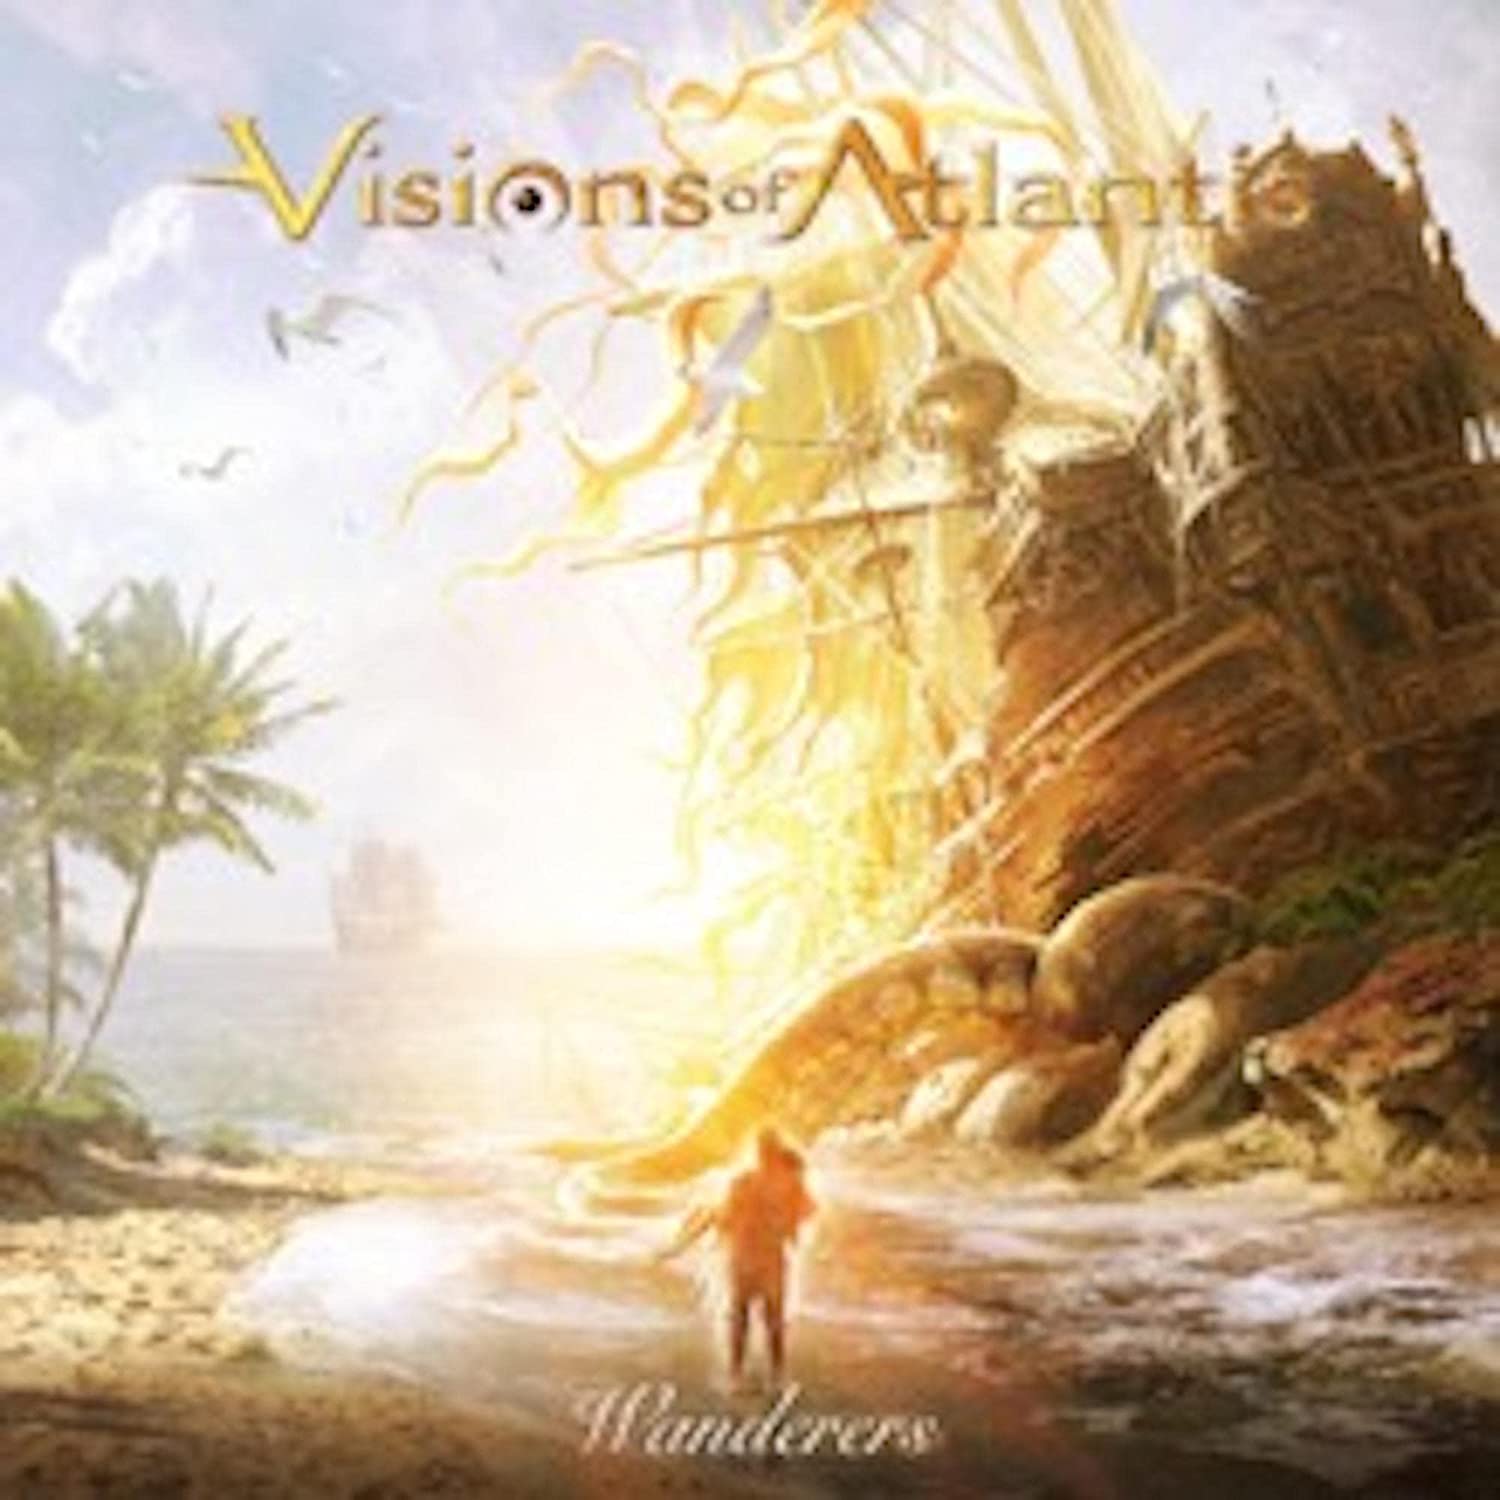 VISIONS OF ATLANTIS - Wanderers cover 